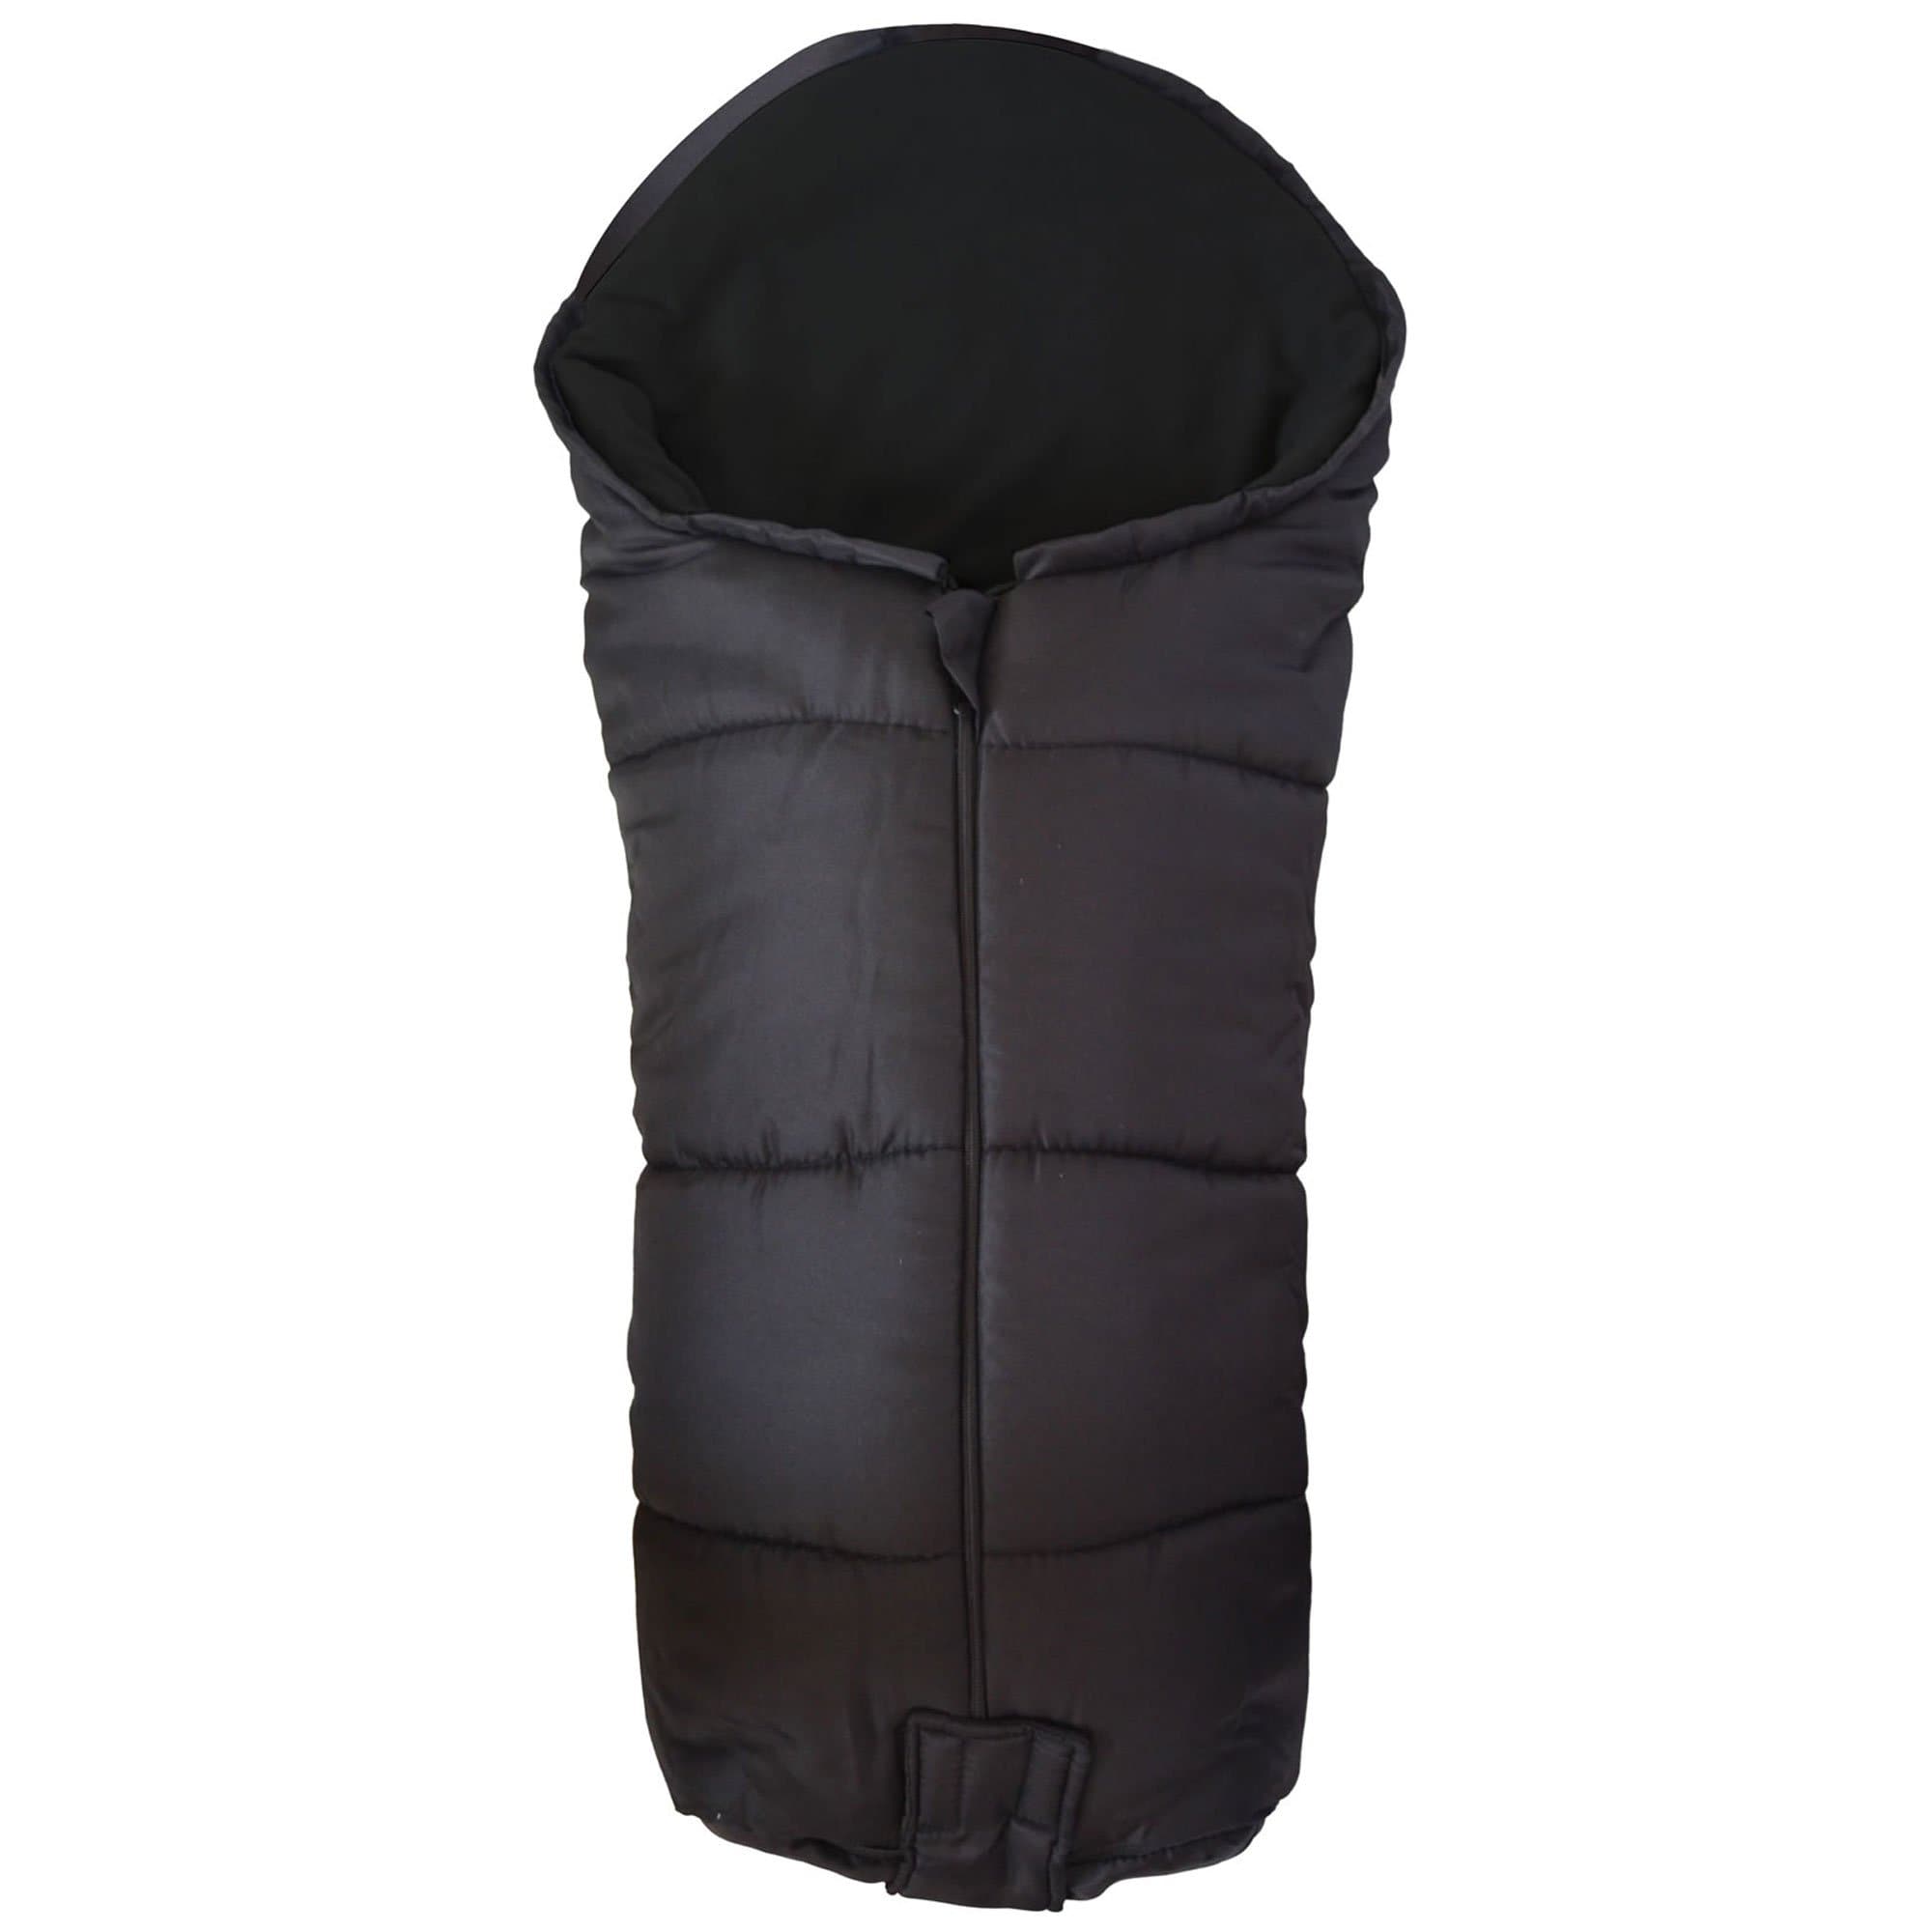 Deluxe Footmuff / Cosy Toes Compatible with Hybrid - Black / Fits All Models | For Your Little One